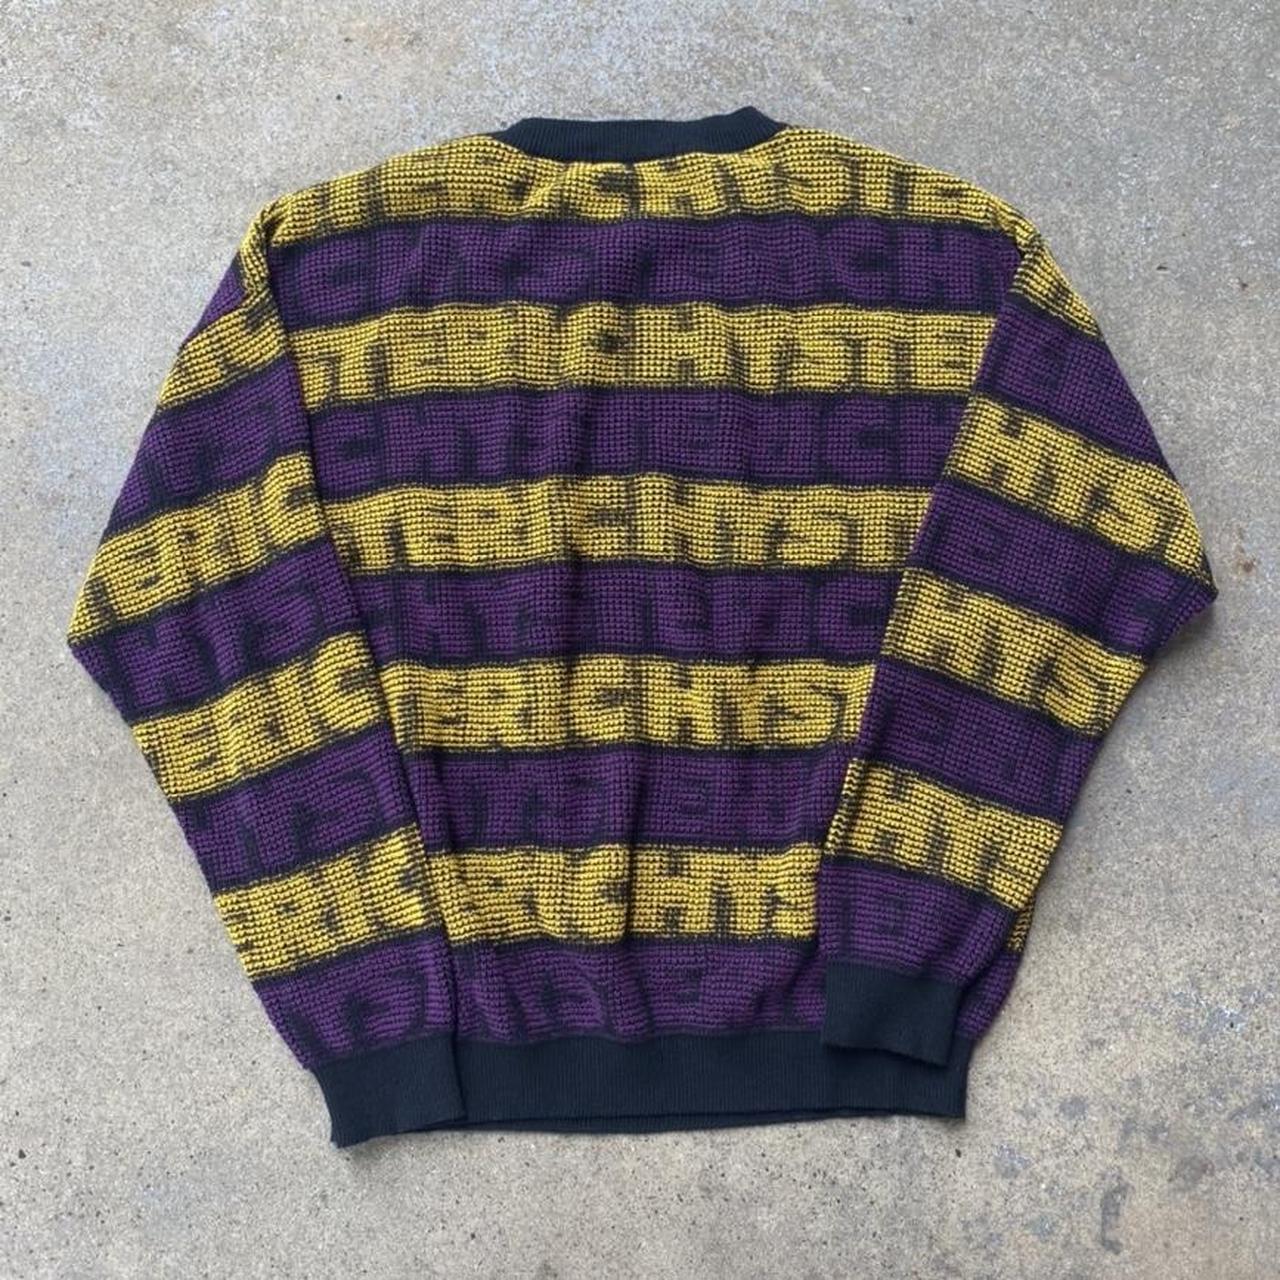 Hysteric Glamour Men's Purple and Yellow Jumper (4)